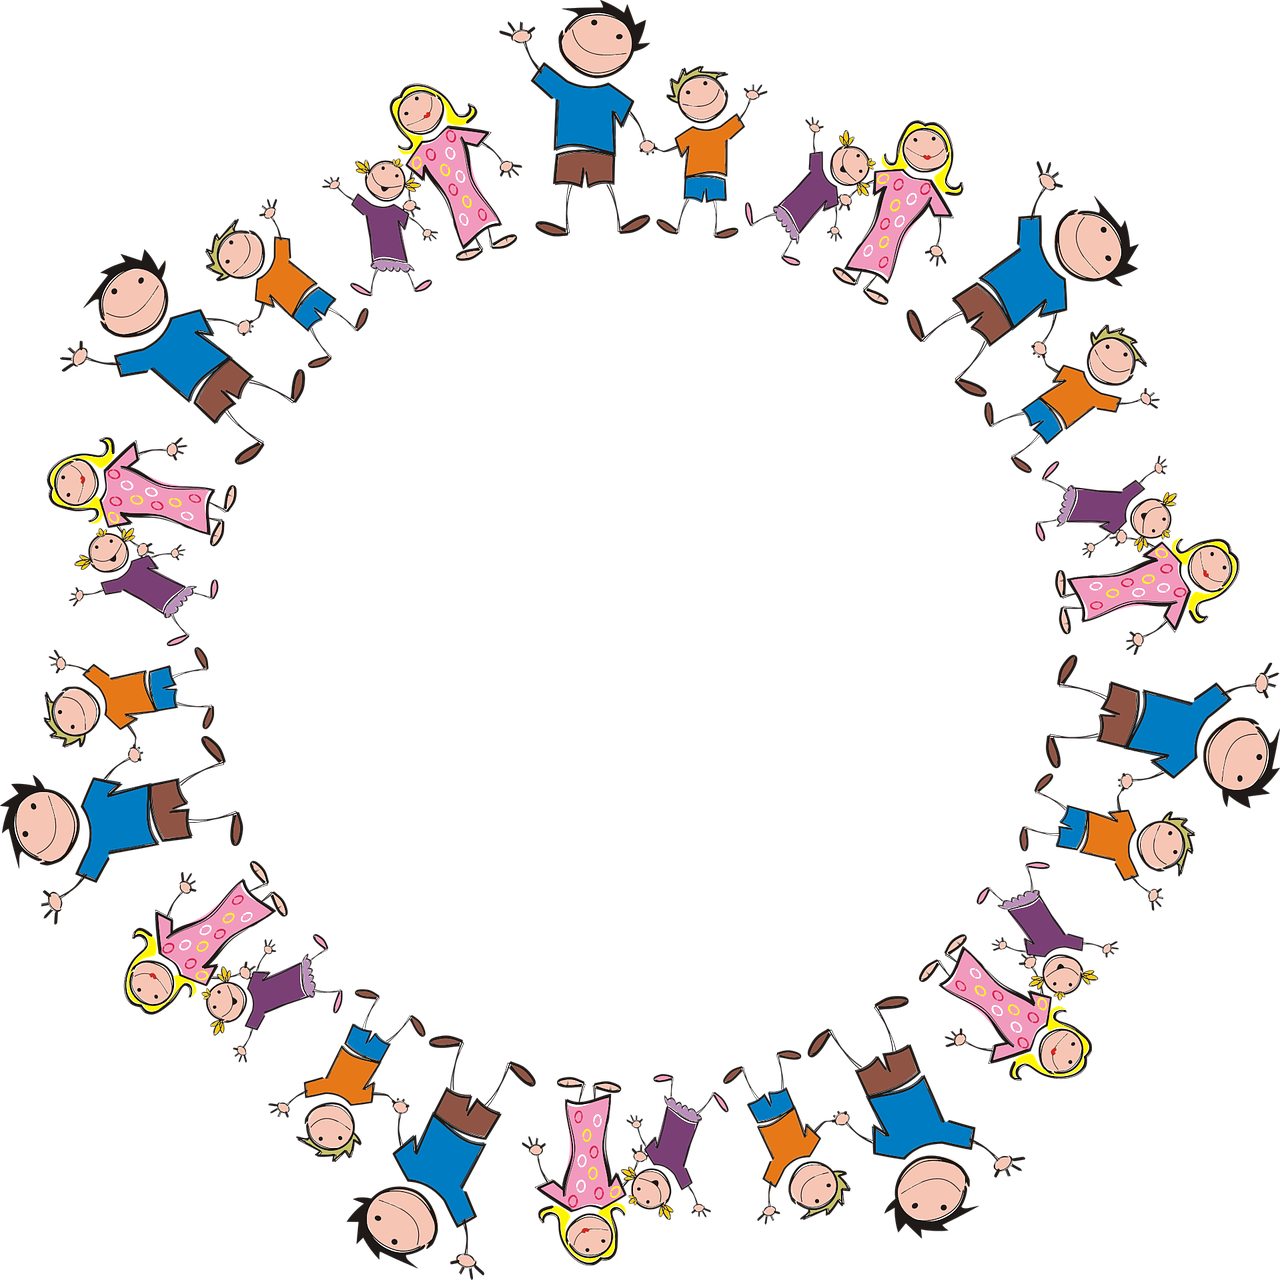 a group of children holding hands in a circle, a cartoon, conceptual art, the background is black, funny illustration, frame around pciture, round elements